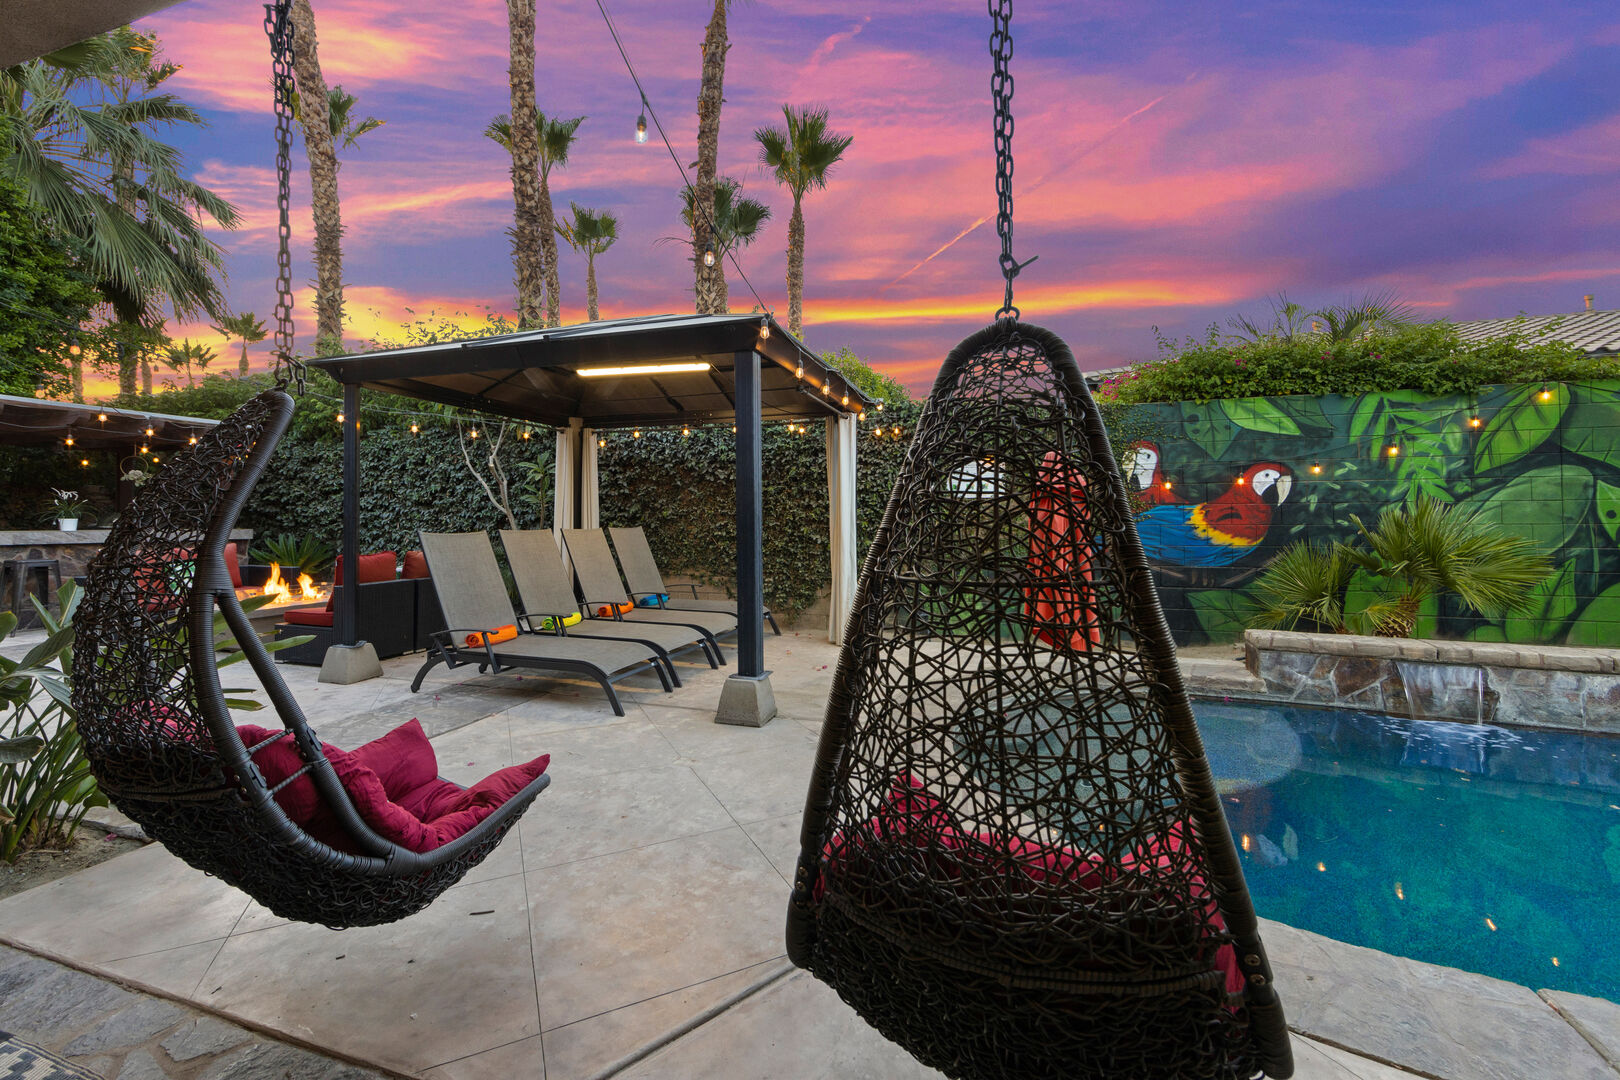 This covered lighted gazebo and hanging chairs are sure to be the favorite spot for lounging.